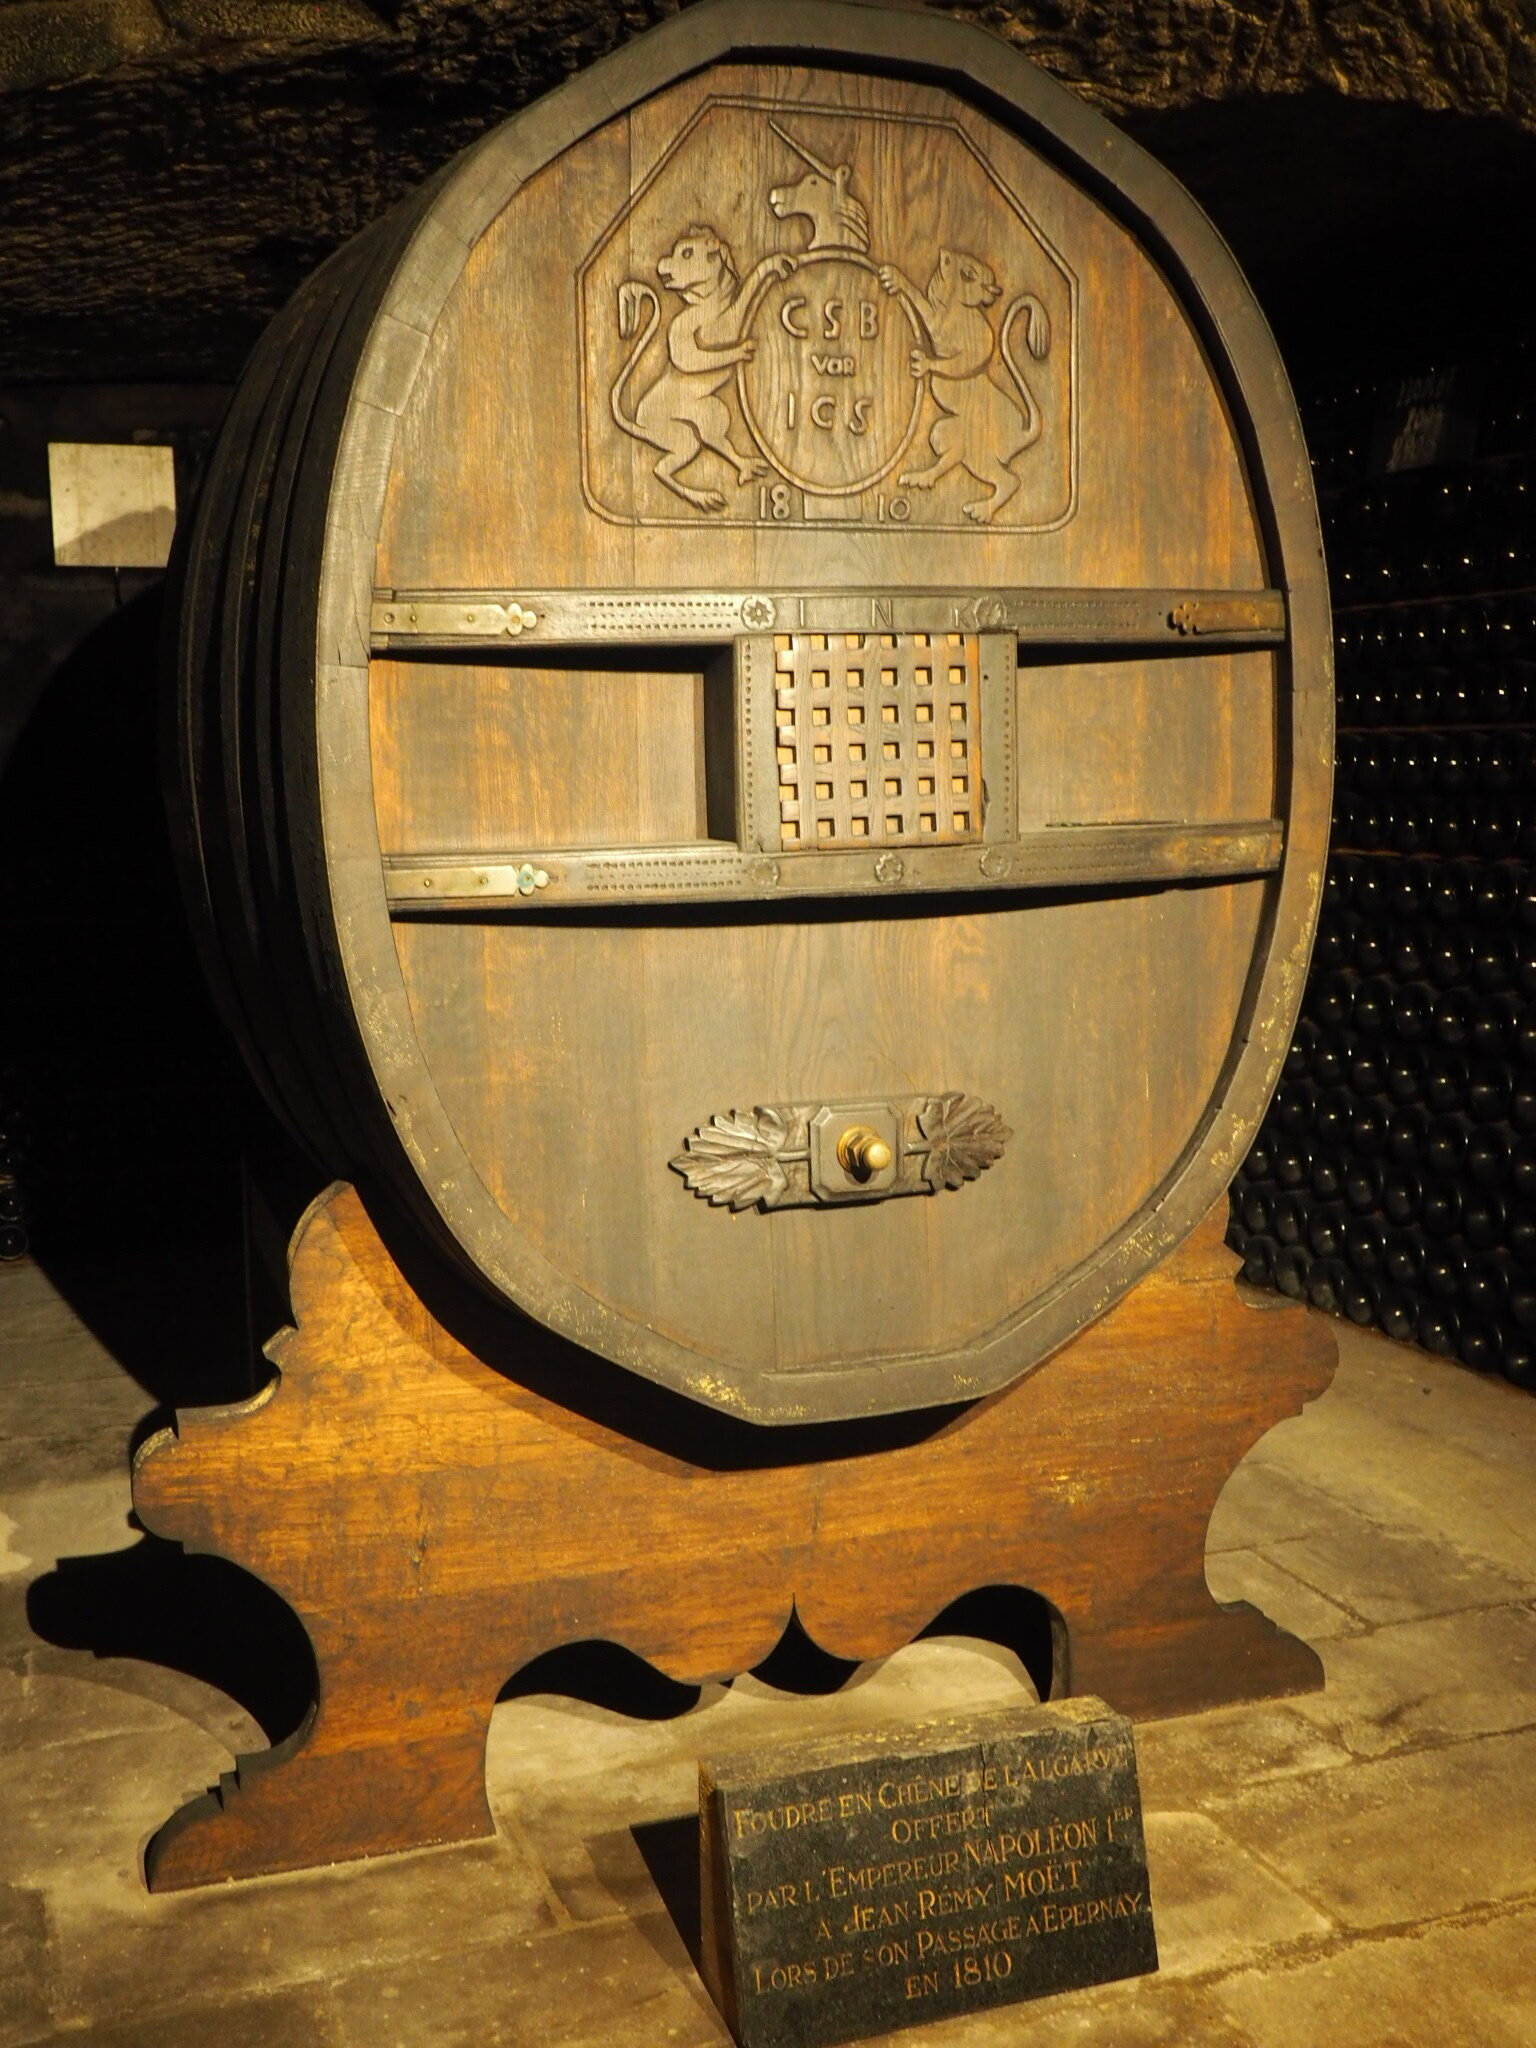 A very nice host’s gift from Napoleon I to Jean Remy Moët, an enormous cask of cognac